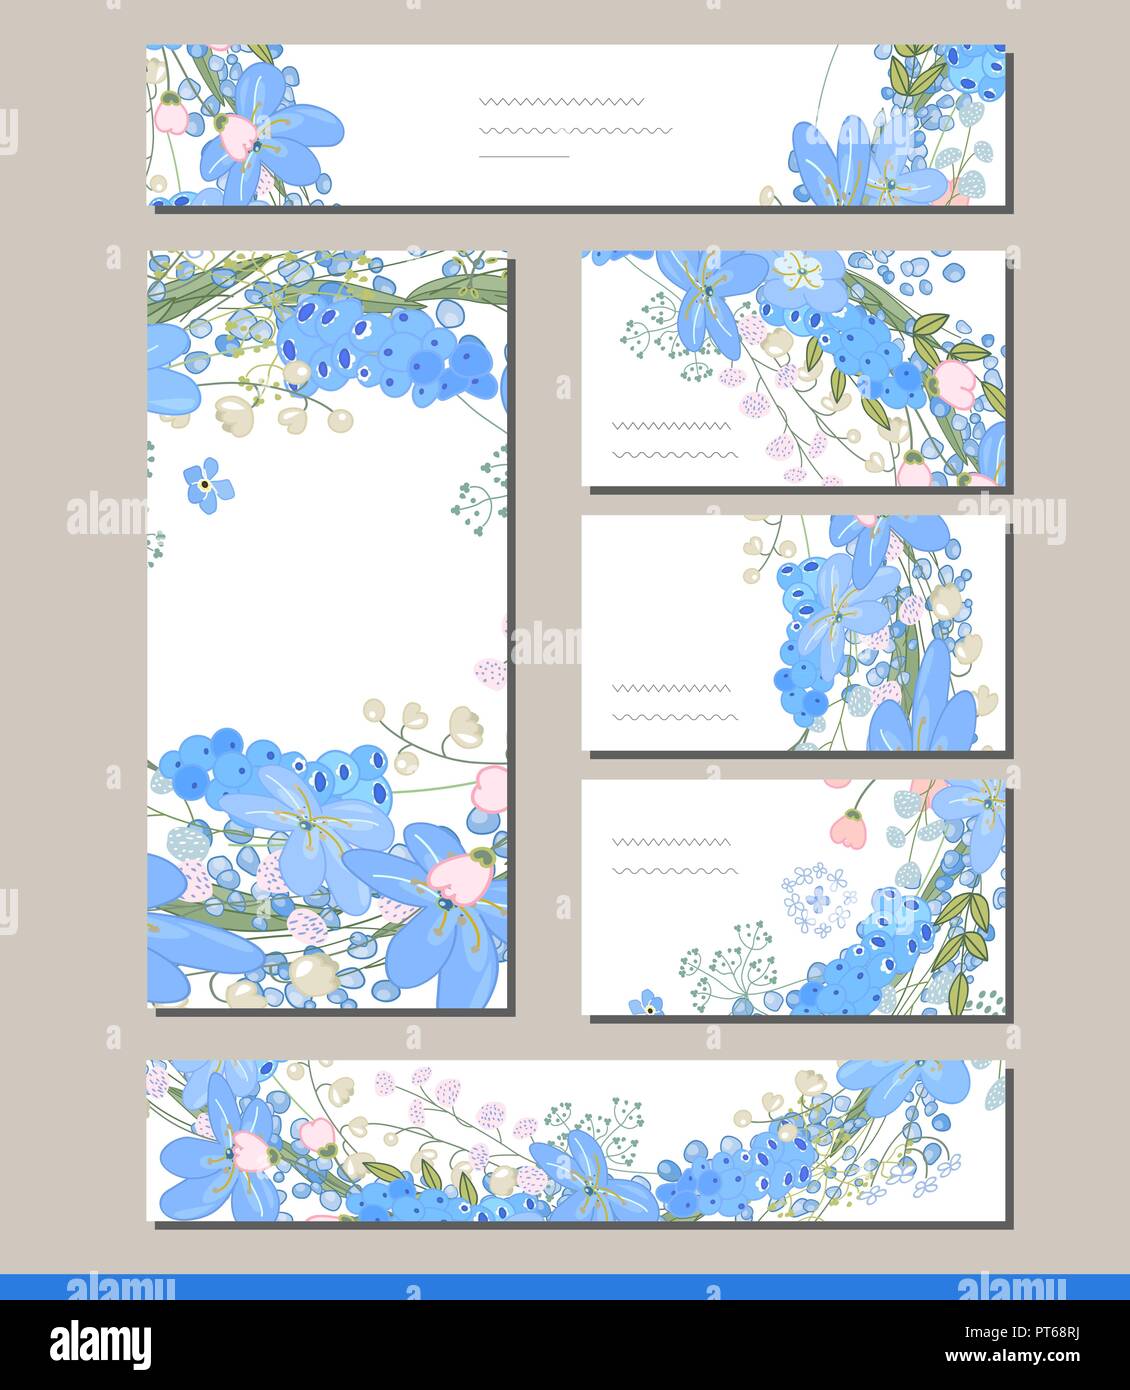 Muscari set with visitcards and greeting templates Stock Vector